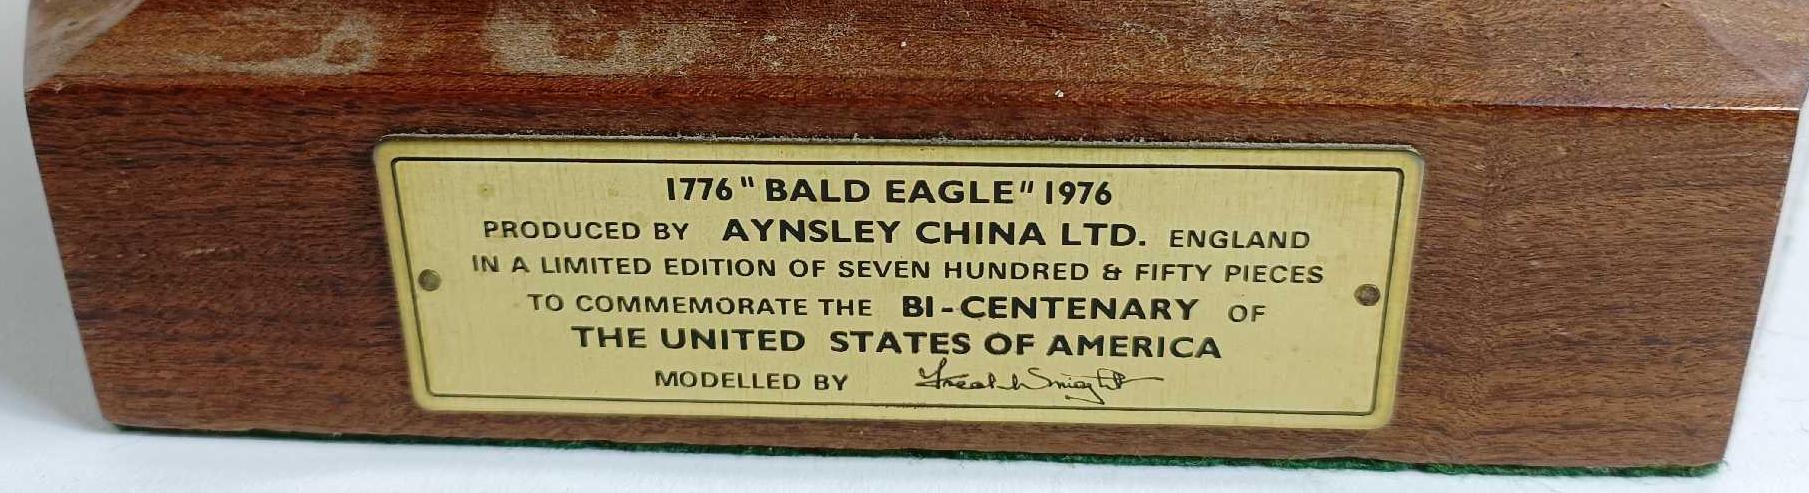 A limited edition Anysley china model of a bald ea - Image 13 of 14